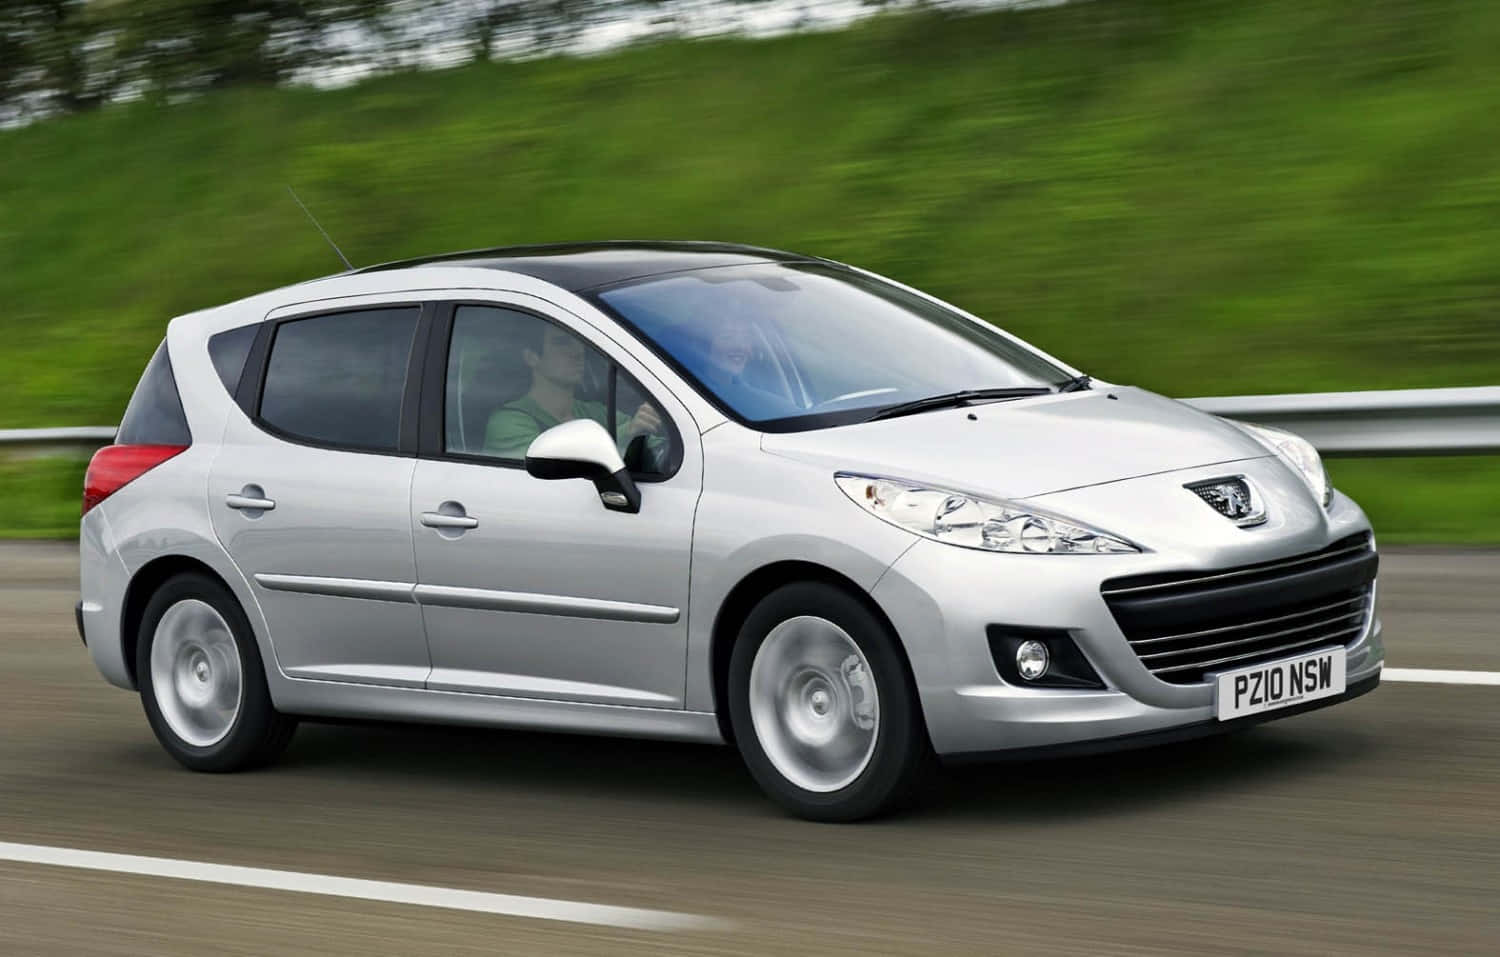 Caption: Sleek Peugeot 207 Gliding On Country Road Wallpaper